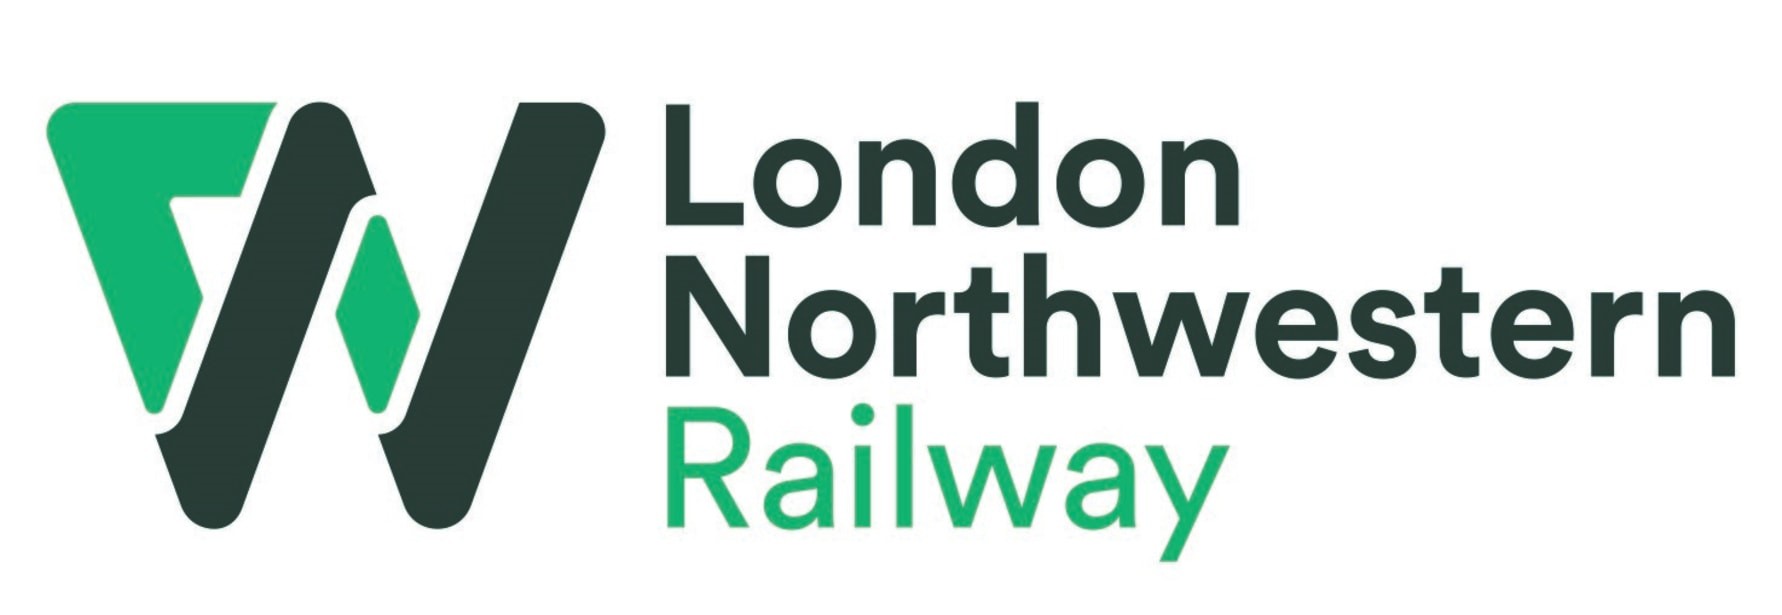 London Northwestern Railway issues warning to fare evaders after thousands fined